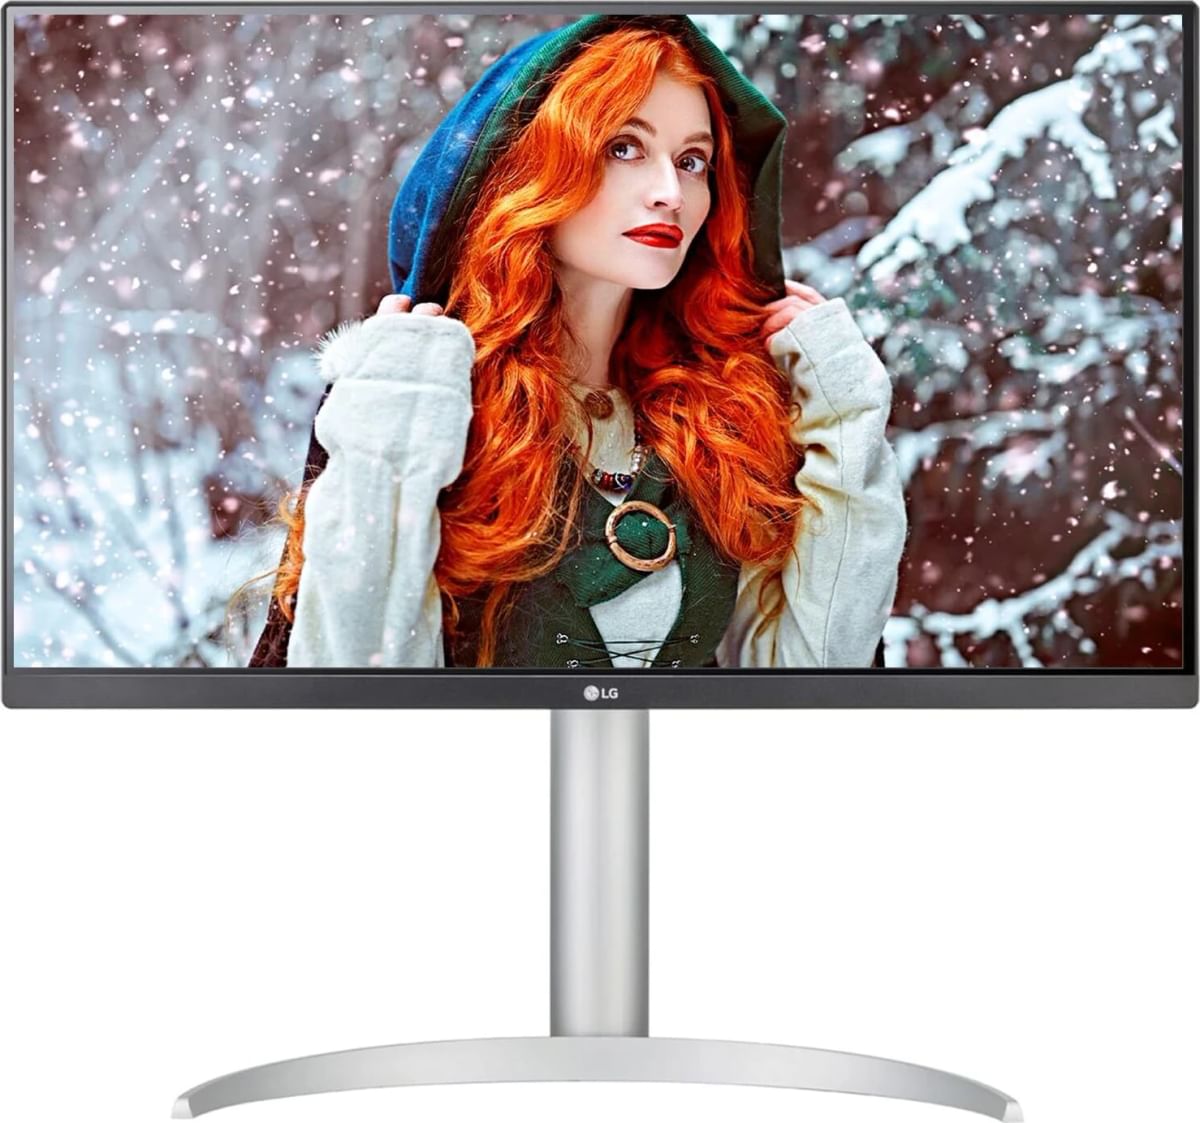 LG 40 inch Full HD IPS Panel Monitor (40MB27HM) Price in India - Buy LG 40  inch Full HD IPS Panel Monitor (40MB27HM) online at